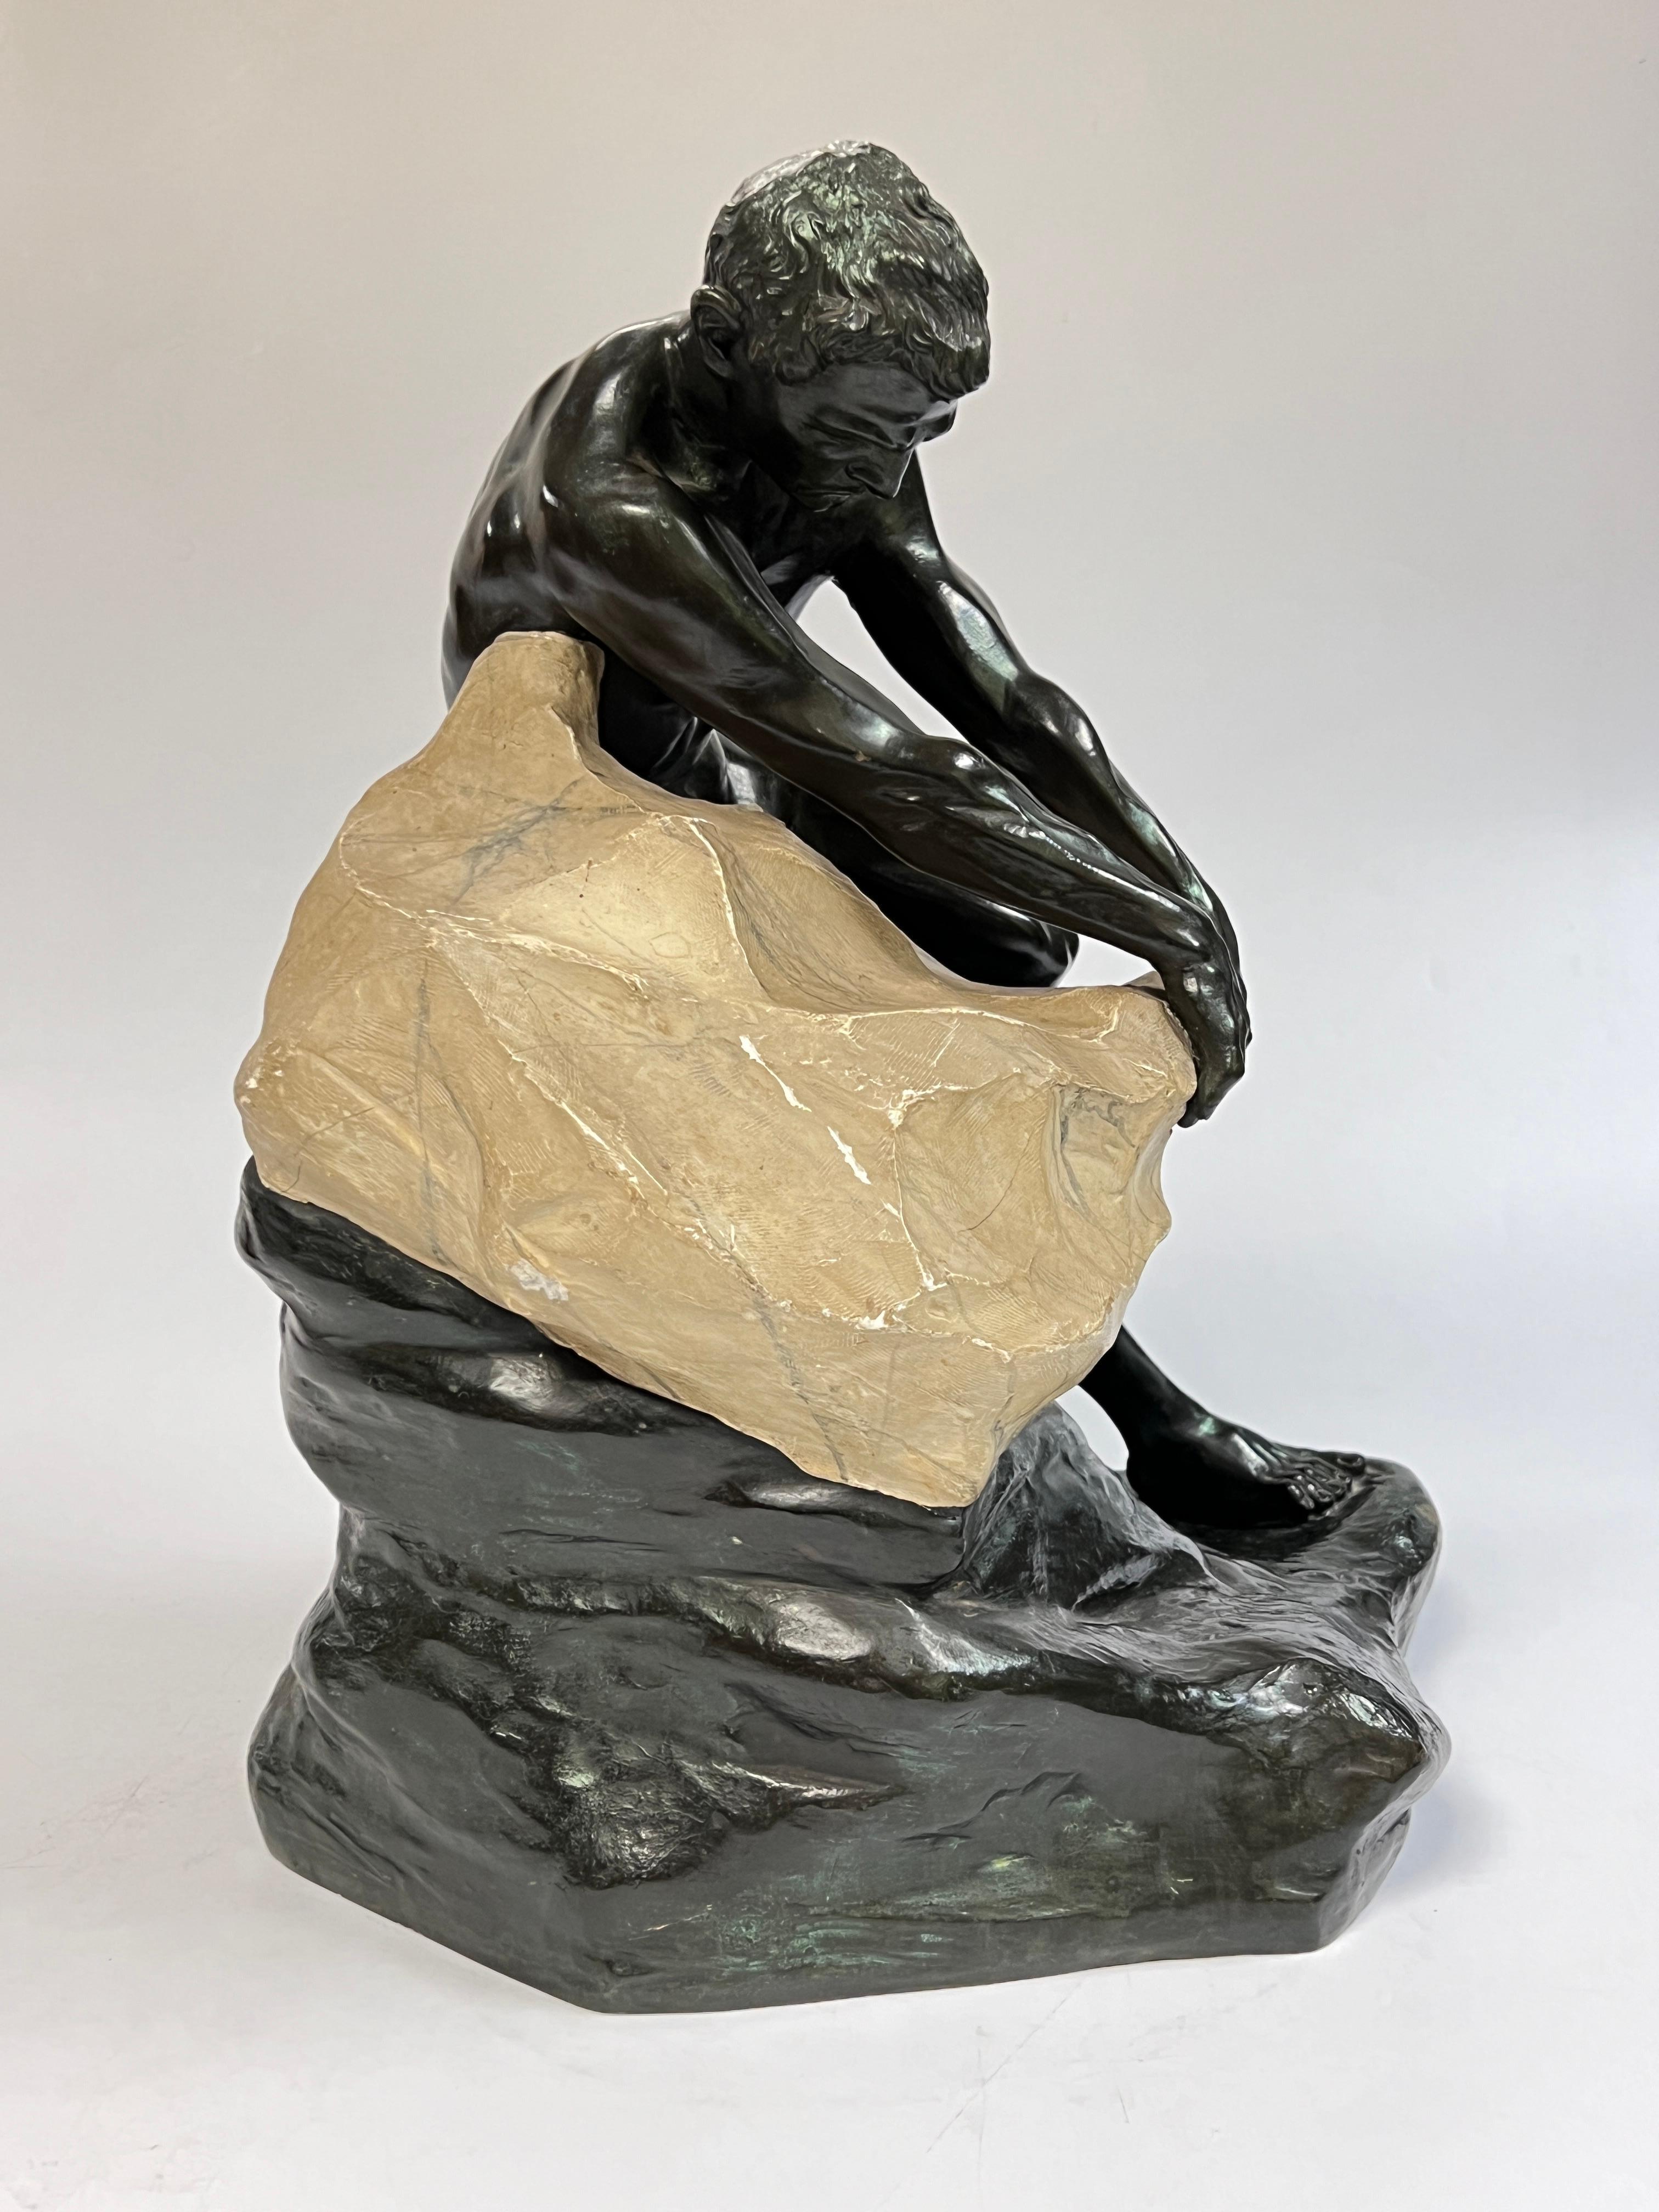 20th Century Bronze German Classical Male Sculpture by Clemens Werminghausen (1877-1963) For Sale